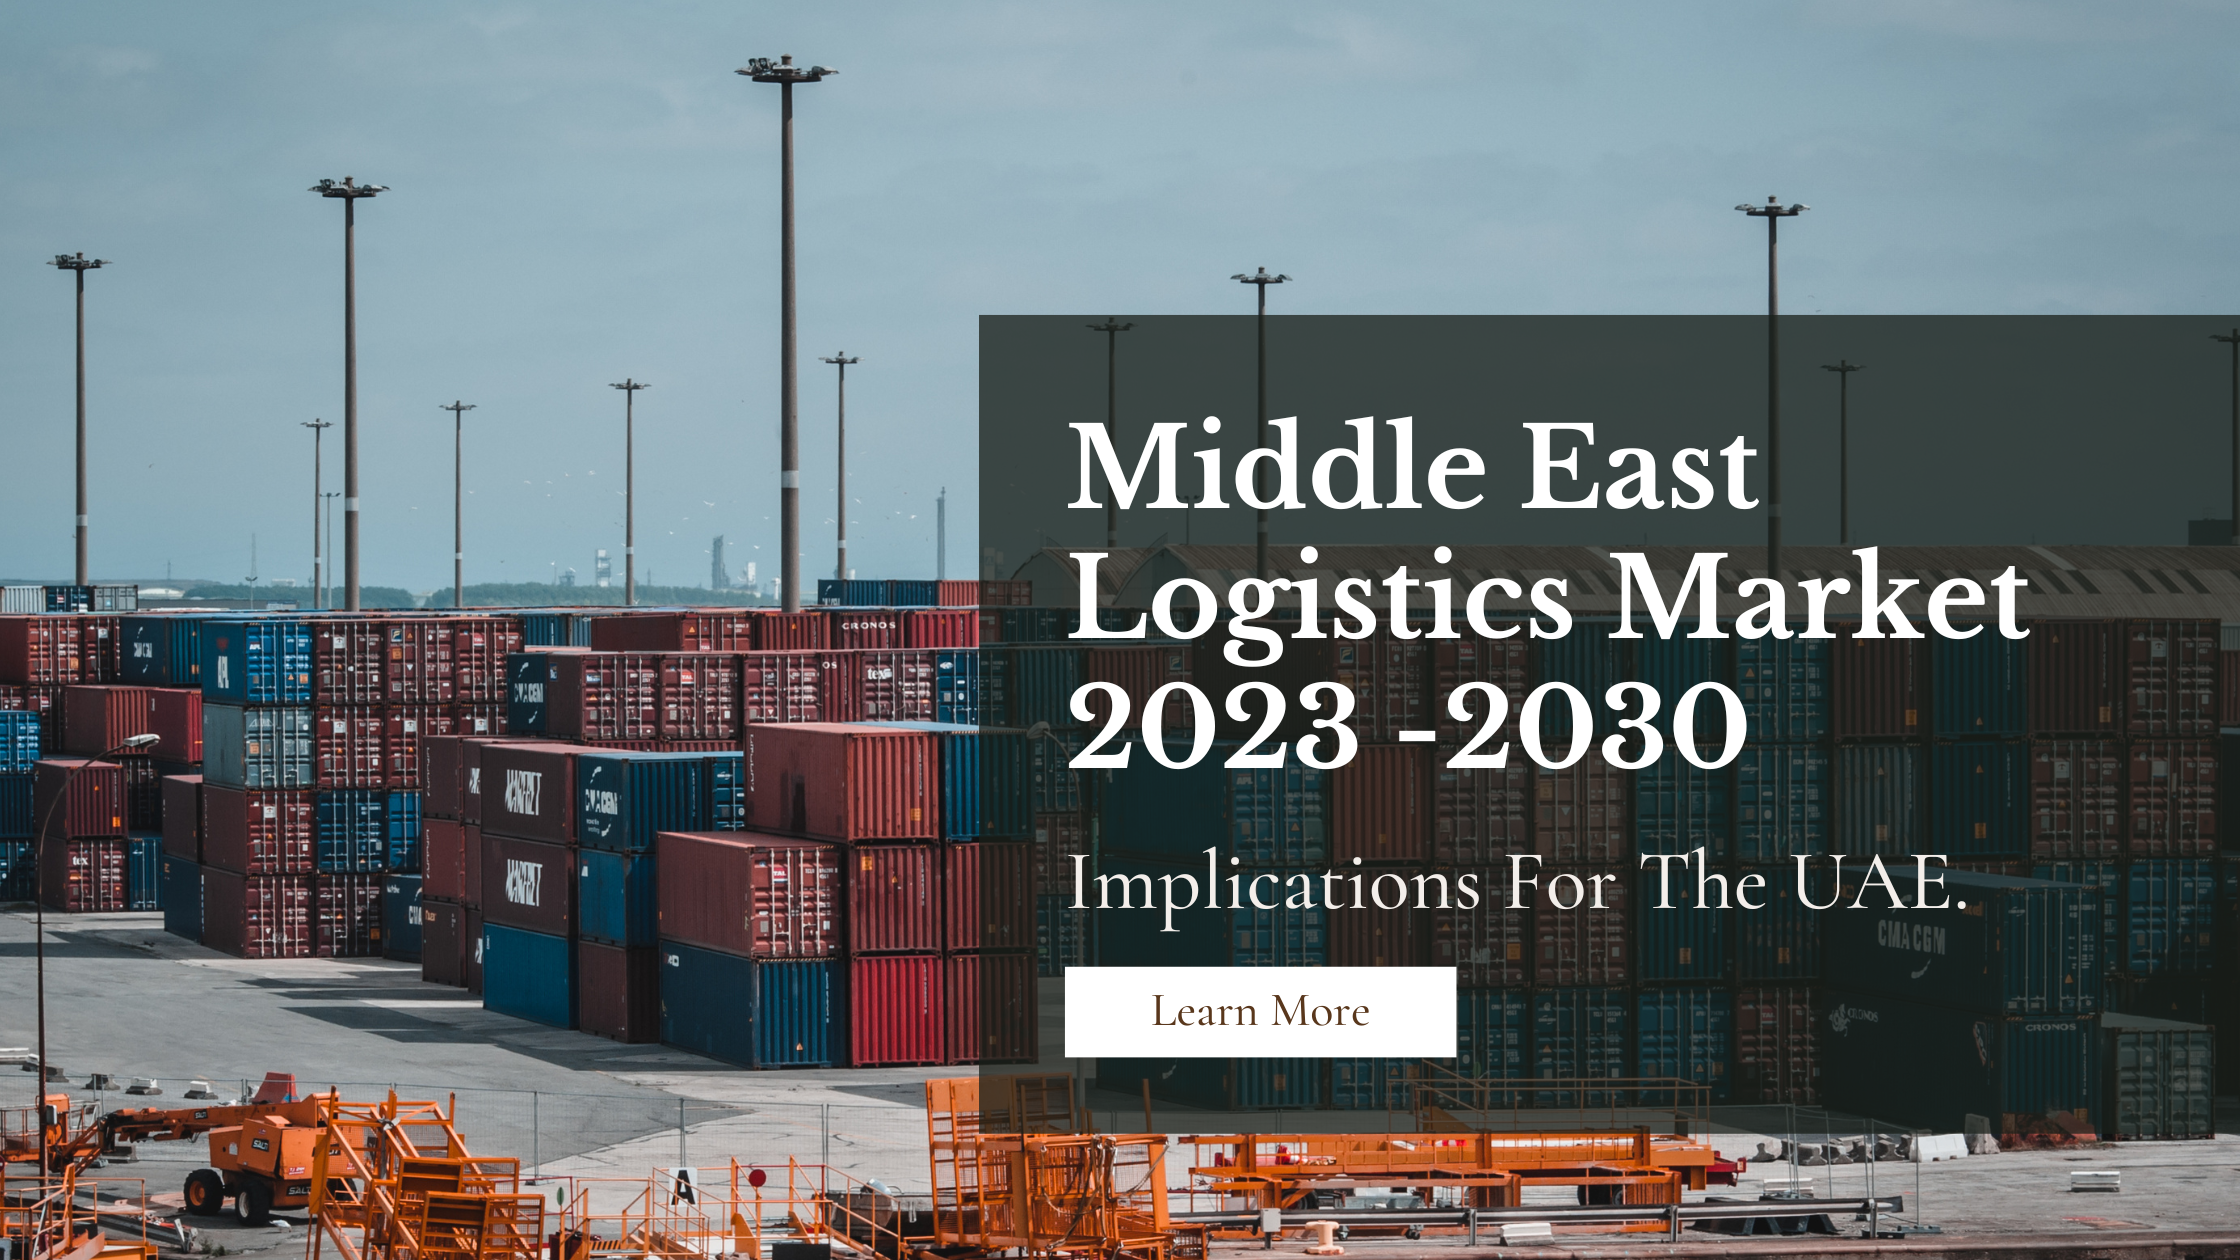 A container Port with text 'RationalStat's Middle East Logistics Market Research And Implications For The UAE' By Vervo Middle East